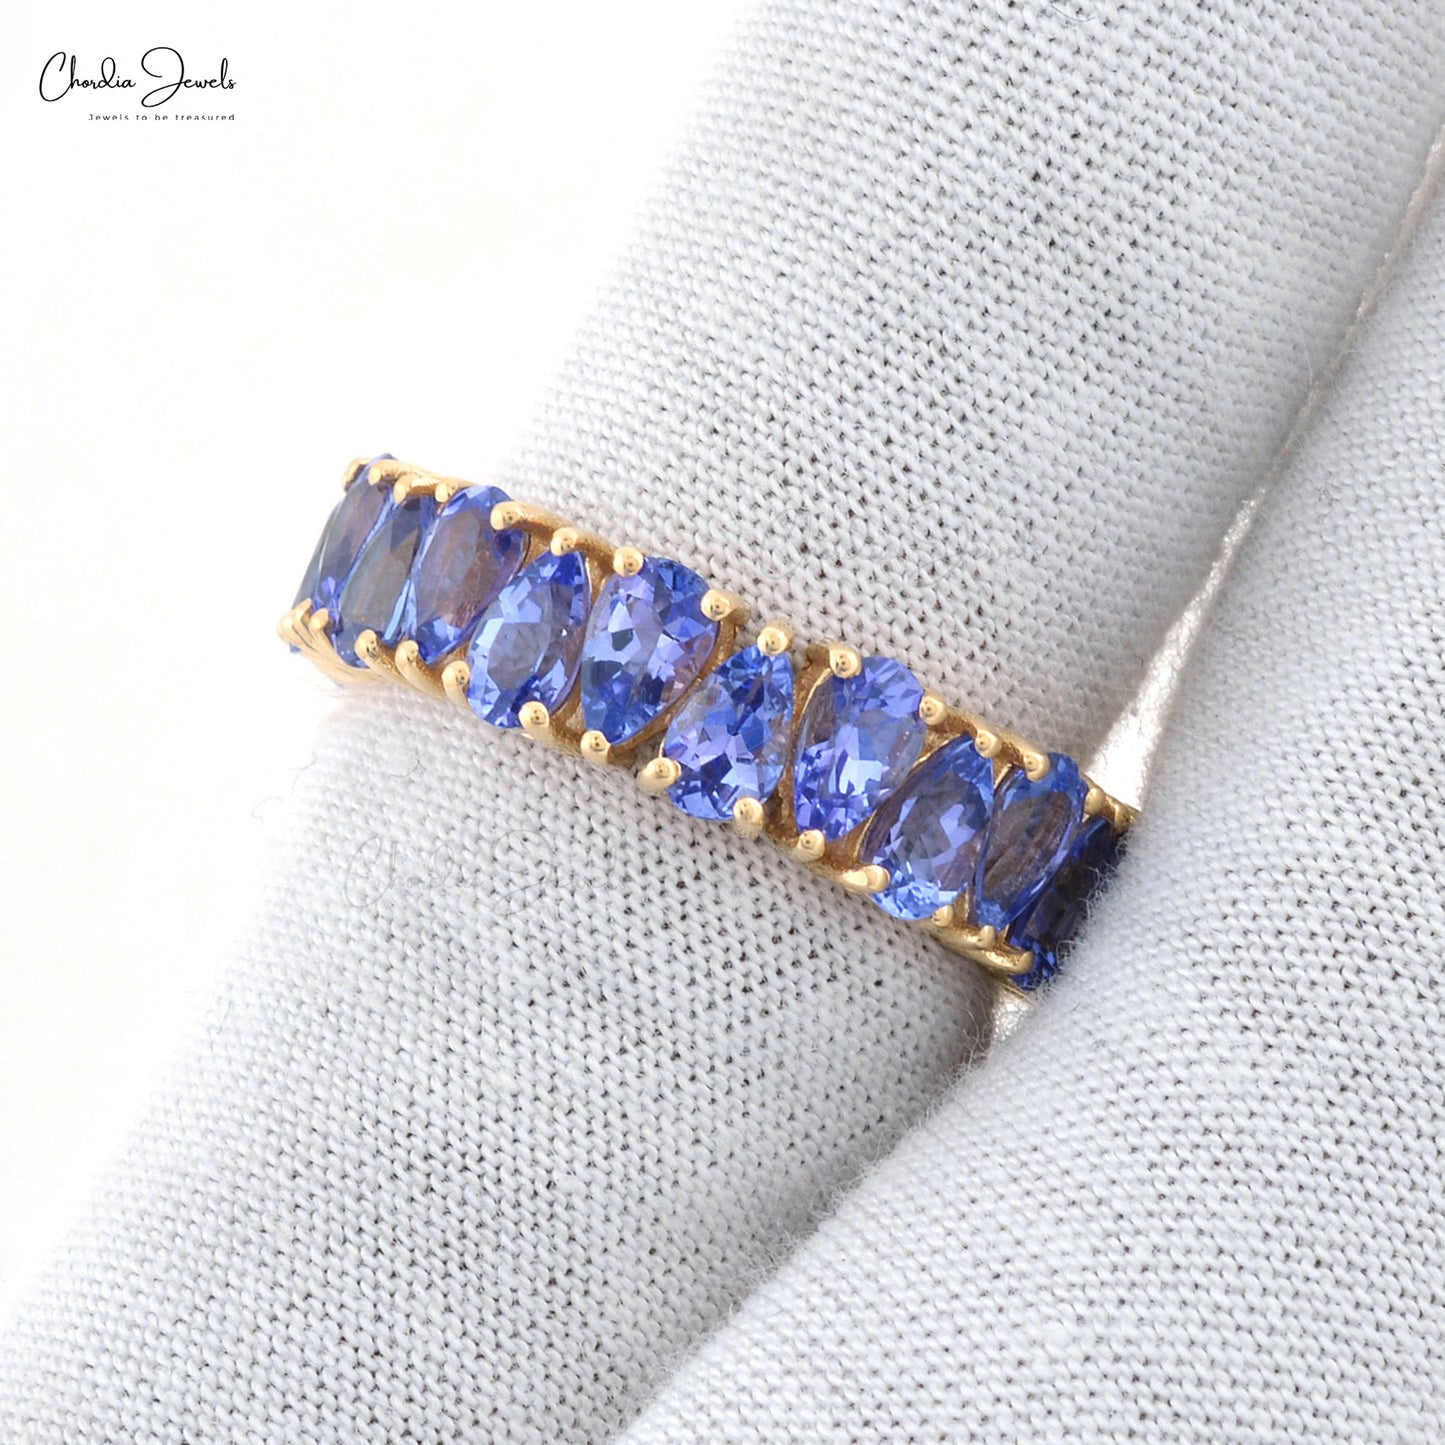 AAA Tanzanite 5x3mm Pear Cut Natural Gemstone Eternity Band 14k Real Yellow Gold Hallmarked Jewelry For Wedding Gift